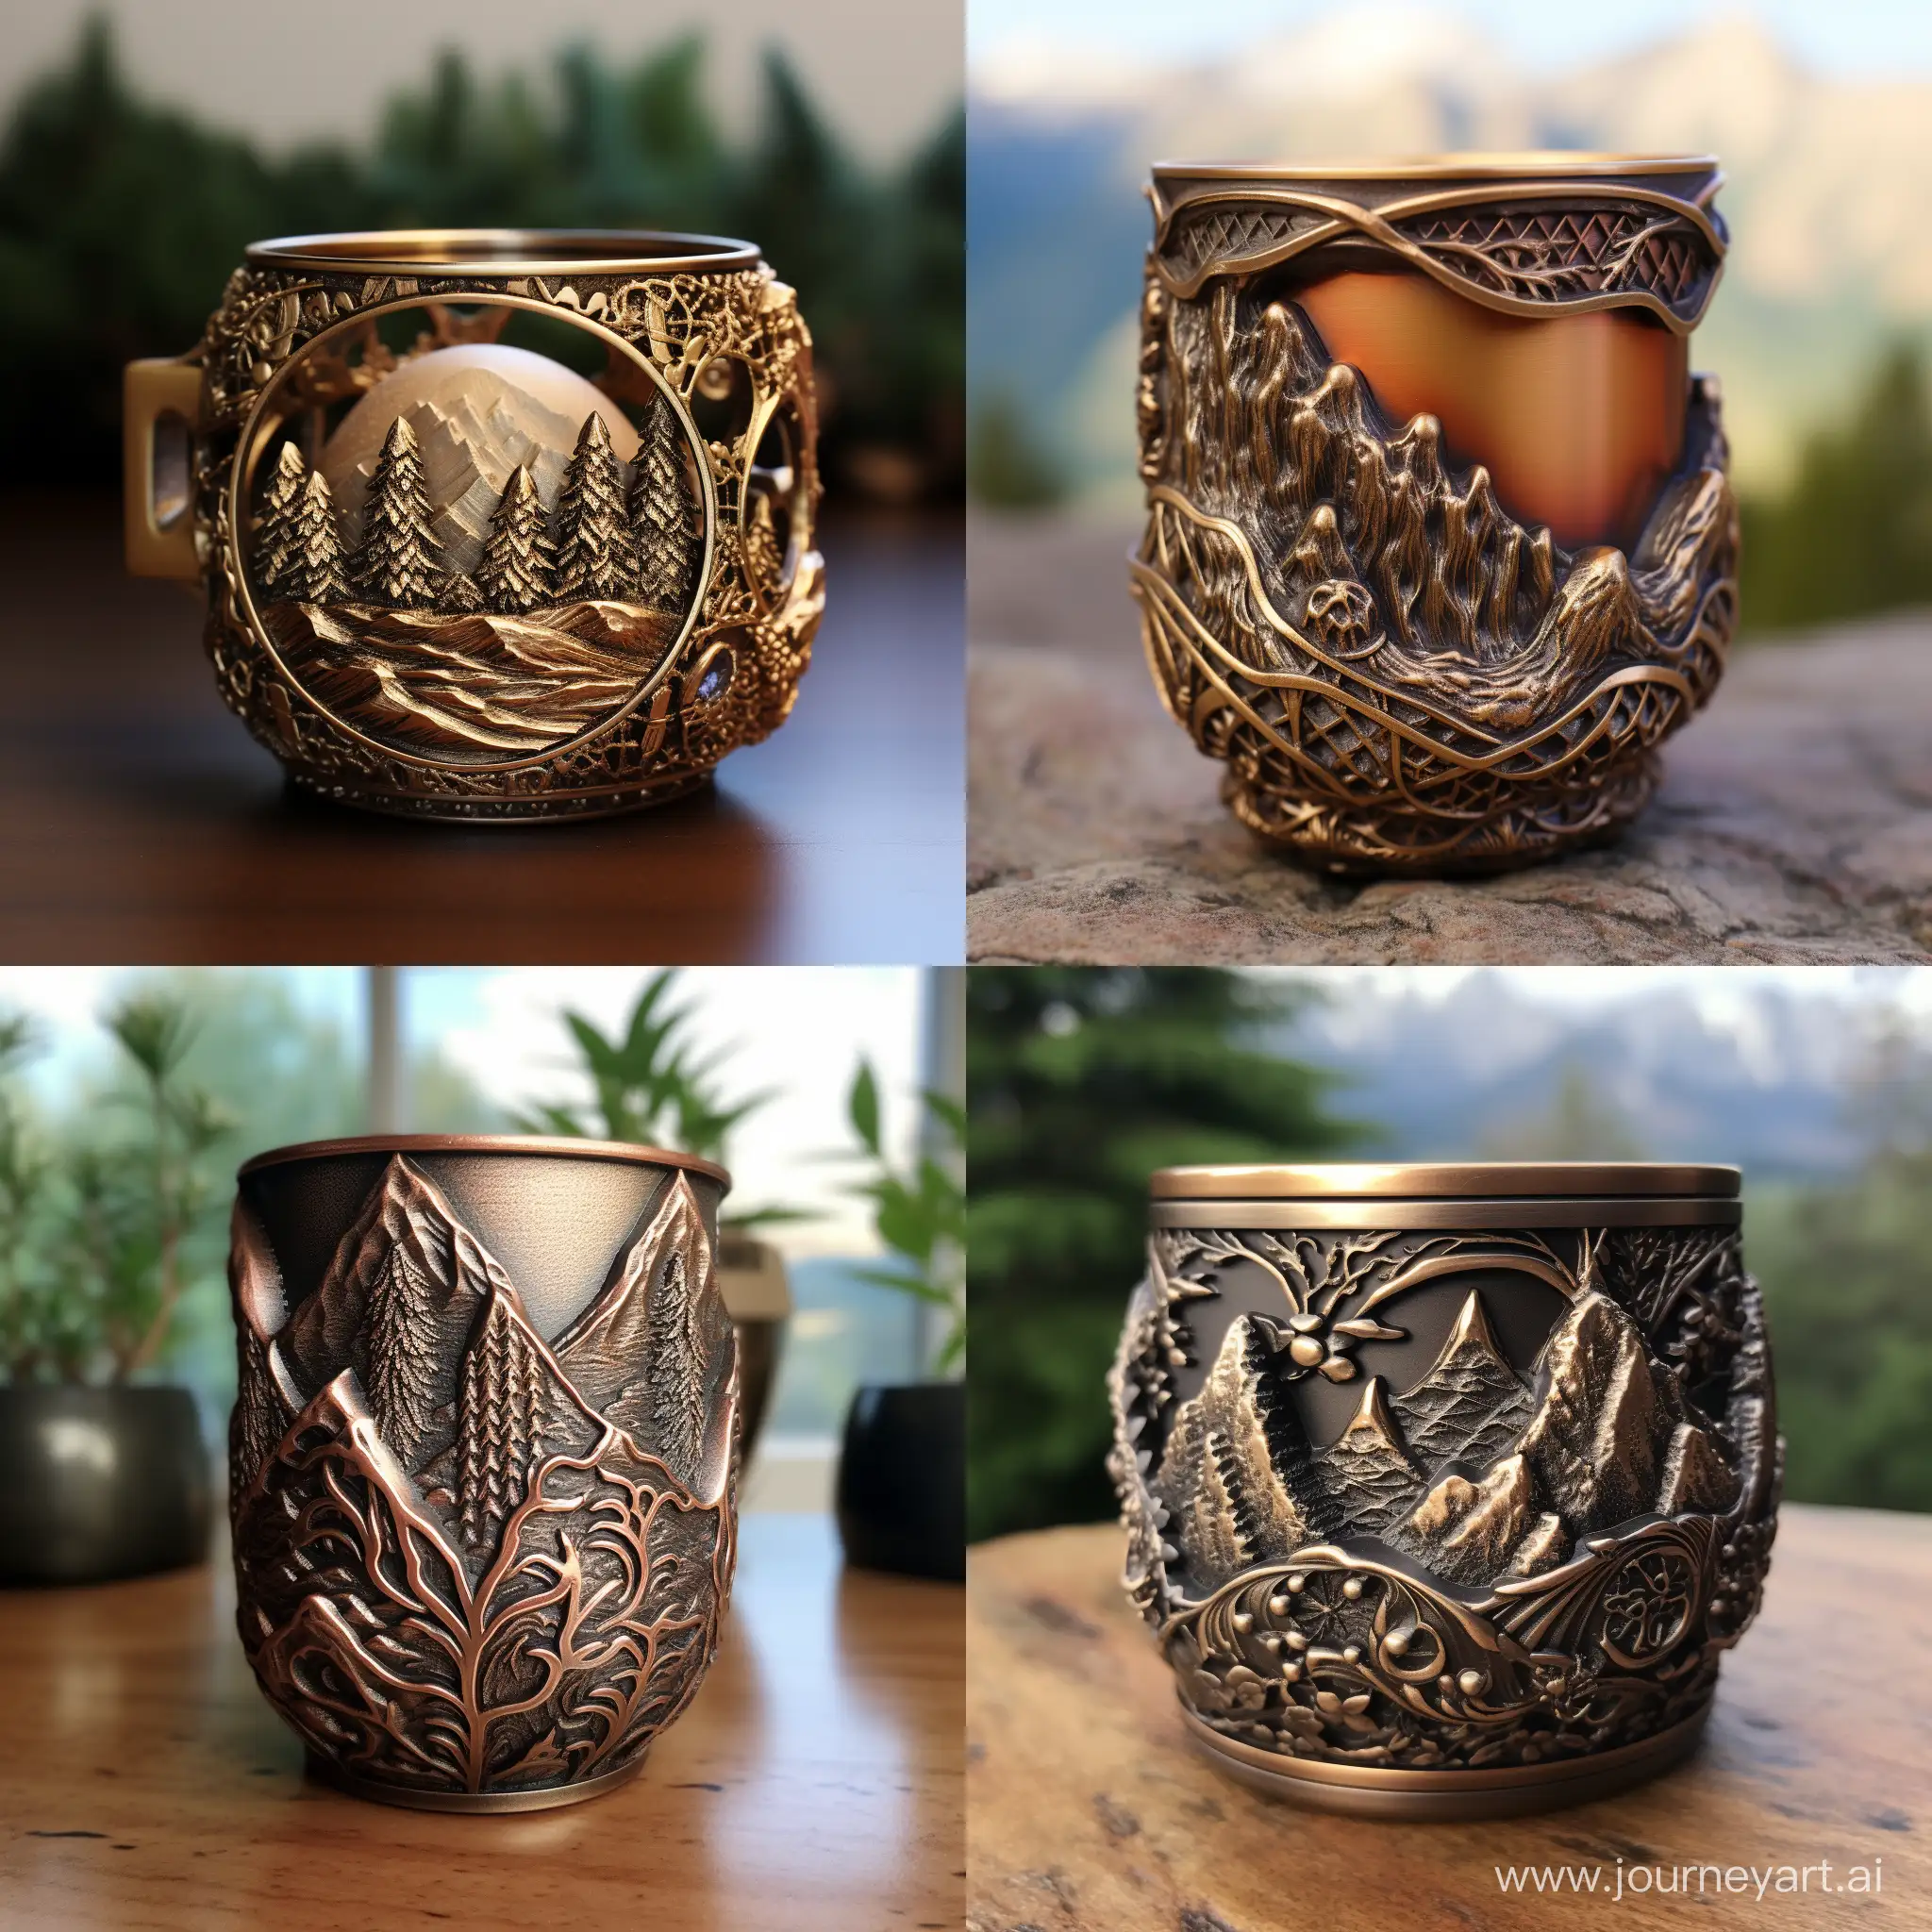 3D-Printed-Bronze-Cup-Holder-with-MountainInspired-Meshy-Ornaments